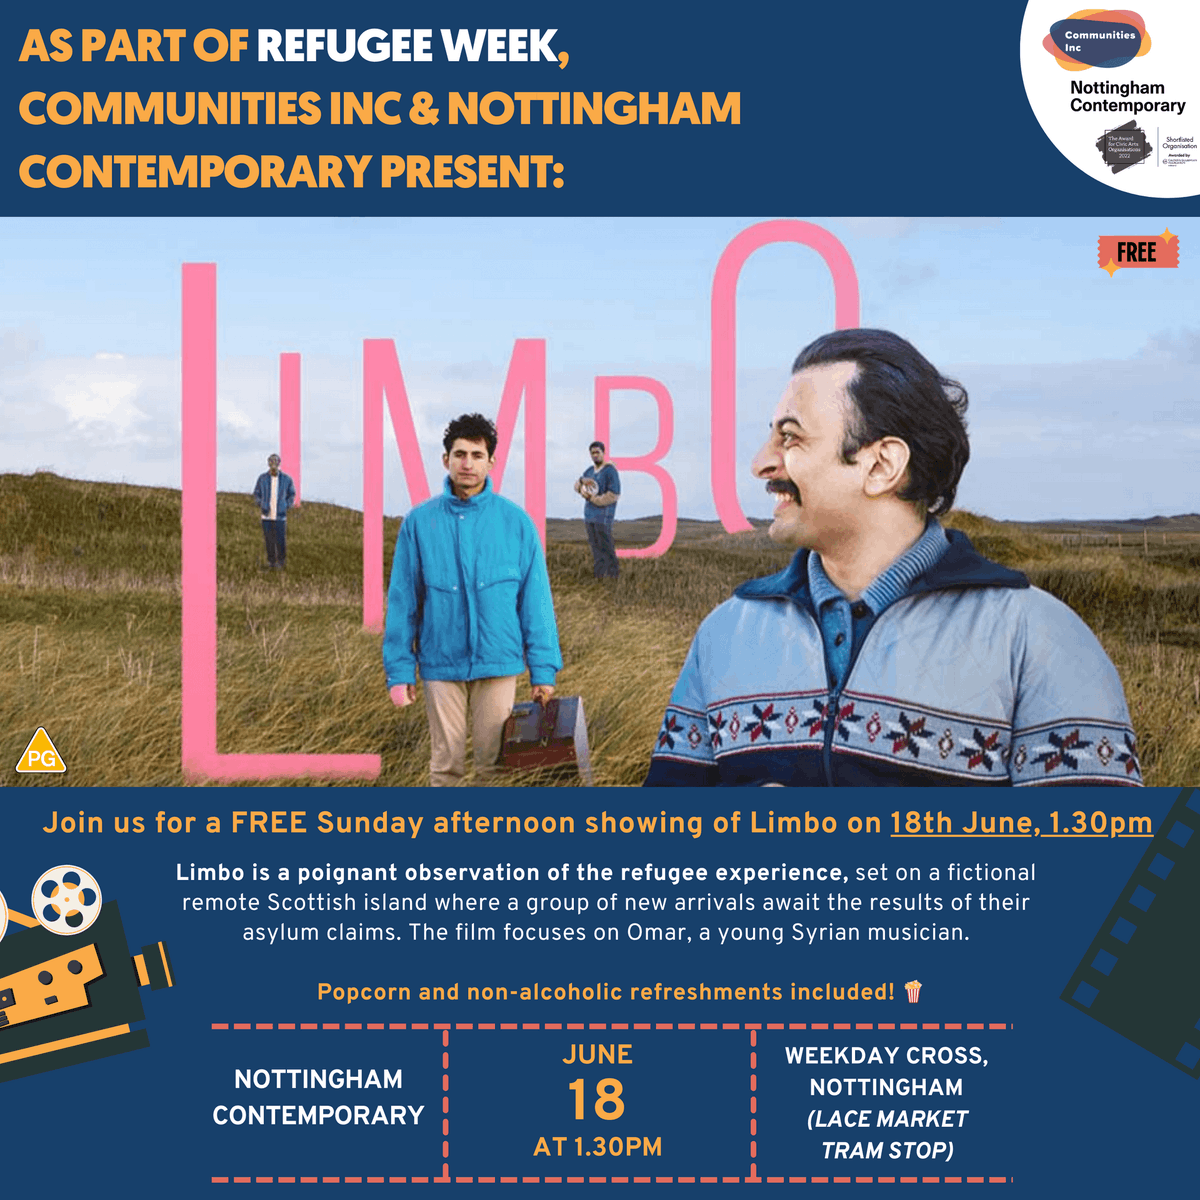 1 week to go! ⏰ Next Sunday, we will be at Nottingham Contemporary for our community film showing of Limbo as part of Refugee Week, and you're invited! 🎞️ Get your FREE tickets now: eventbrite.co.uk/e/651768405847